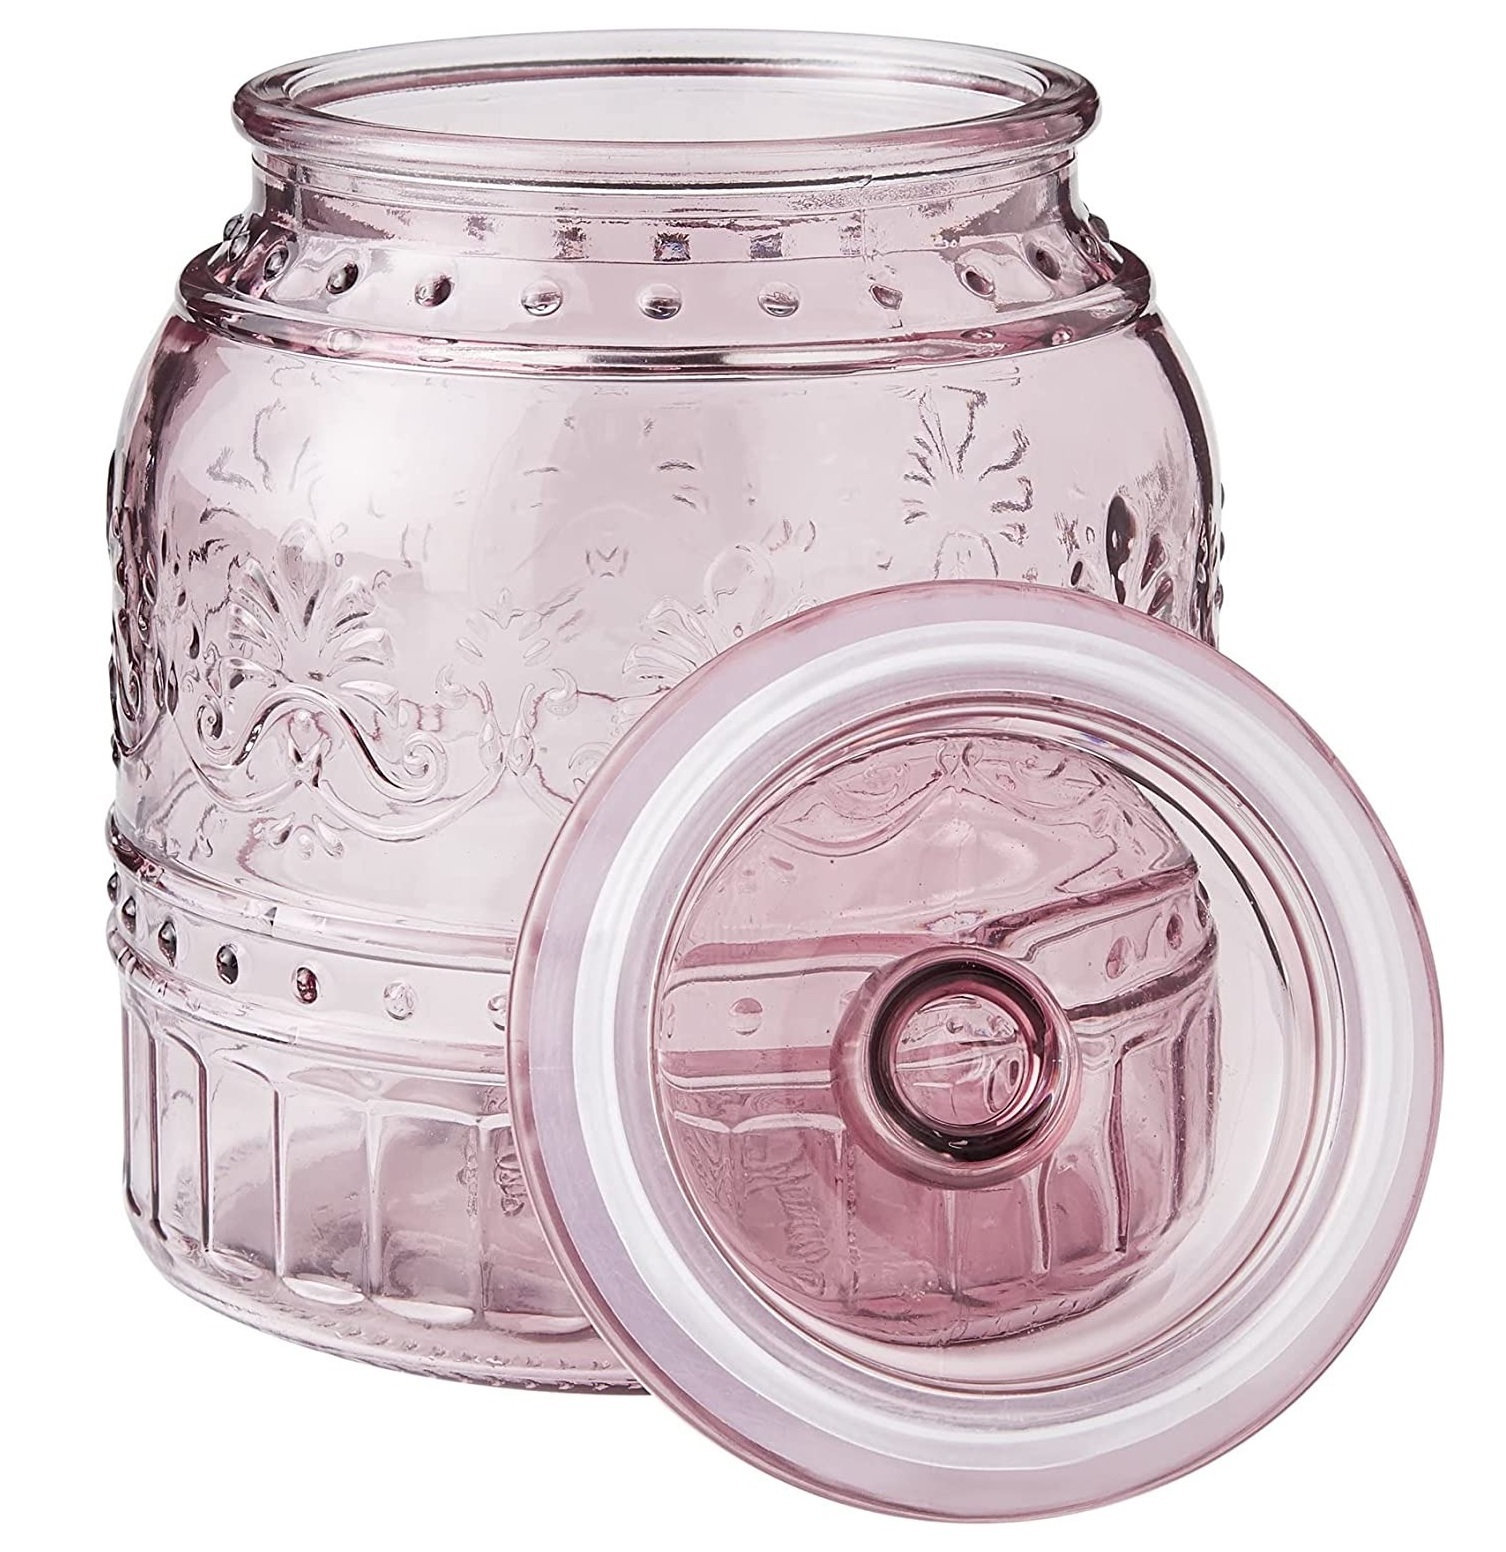 https://foter.com/photos/424/rose-colored-glass-kitchen-canisters.jpeg